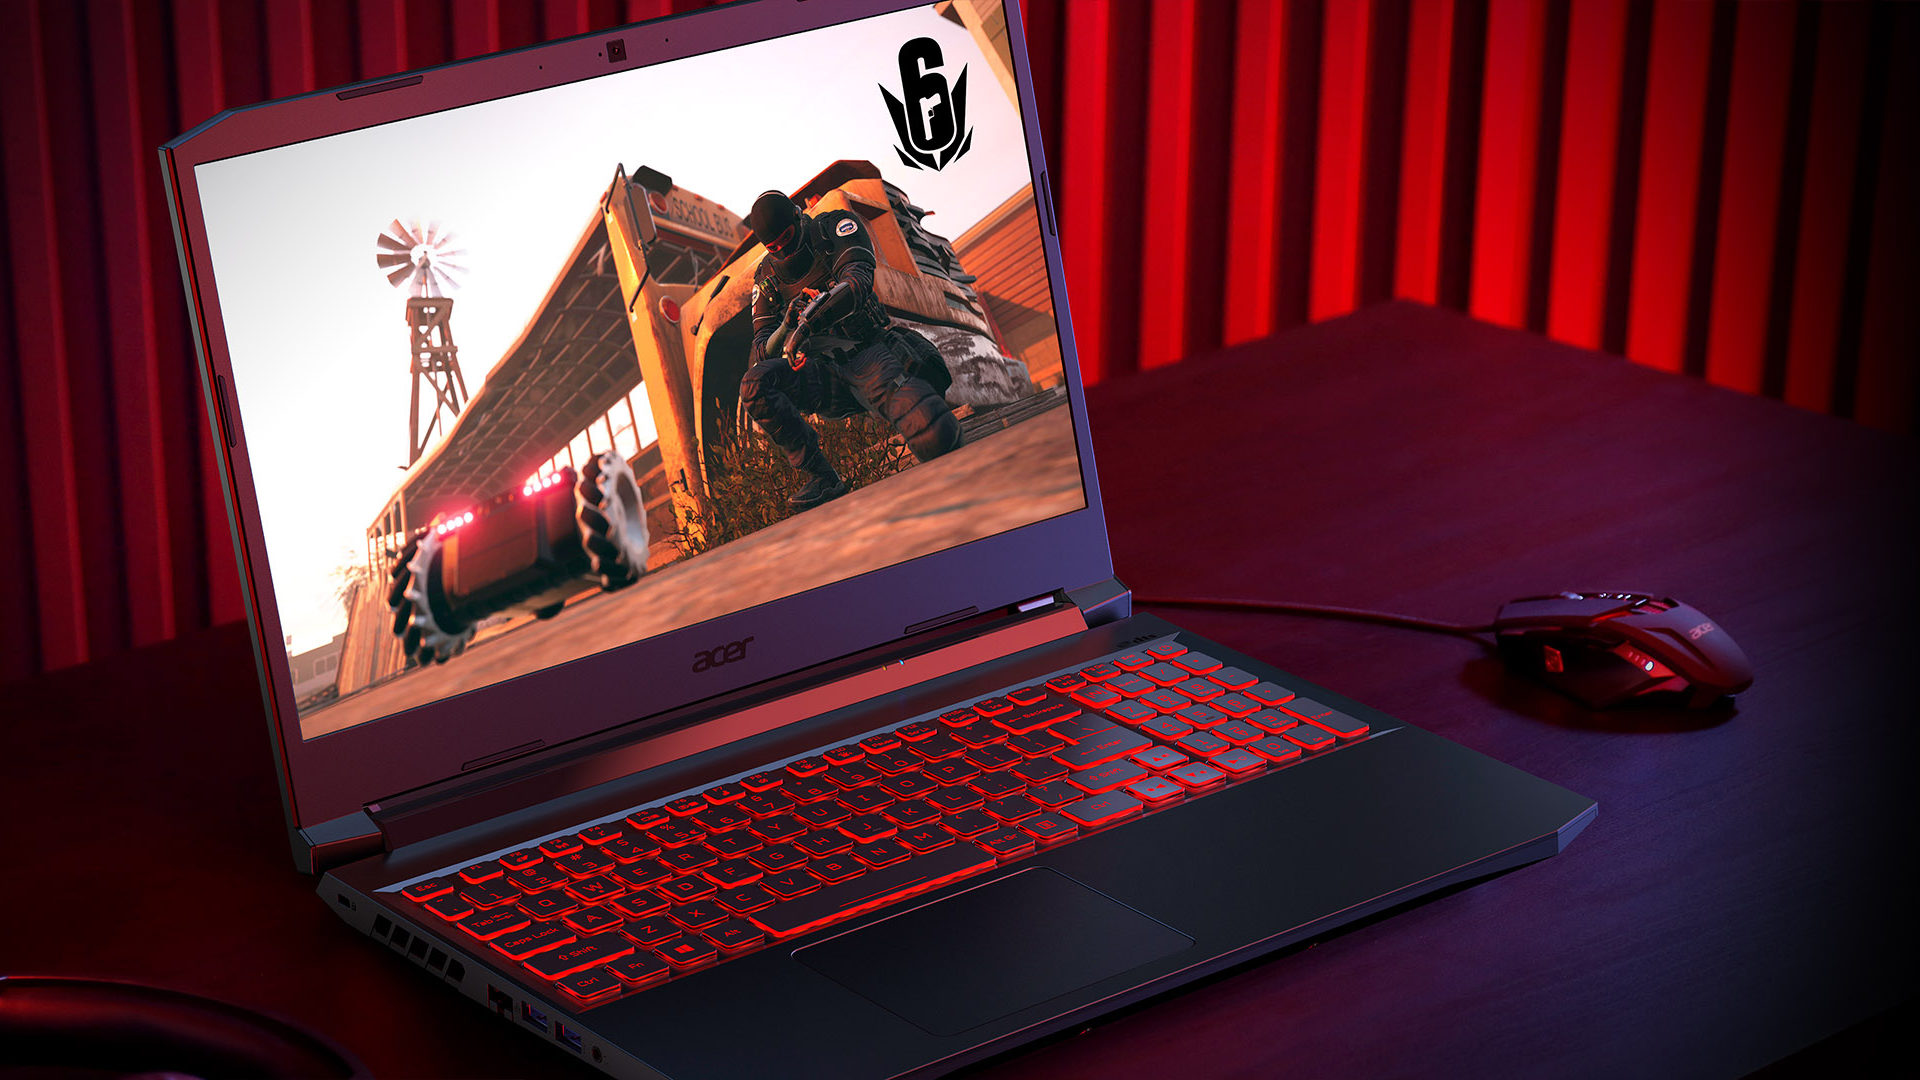 gaming laptops for sale